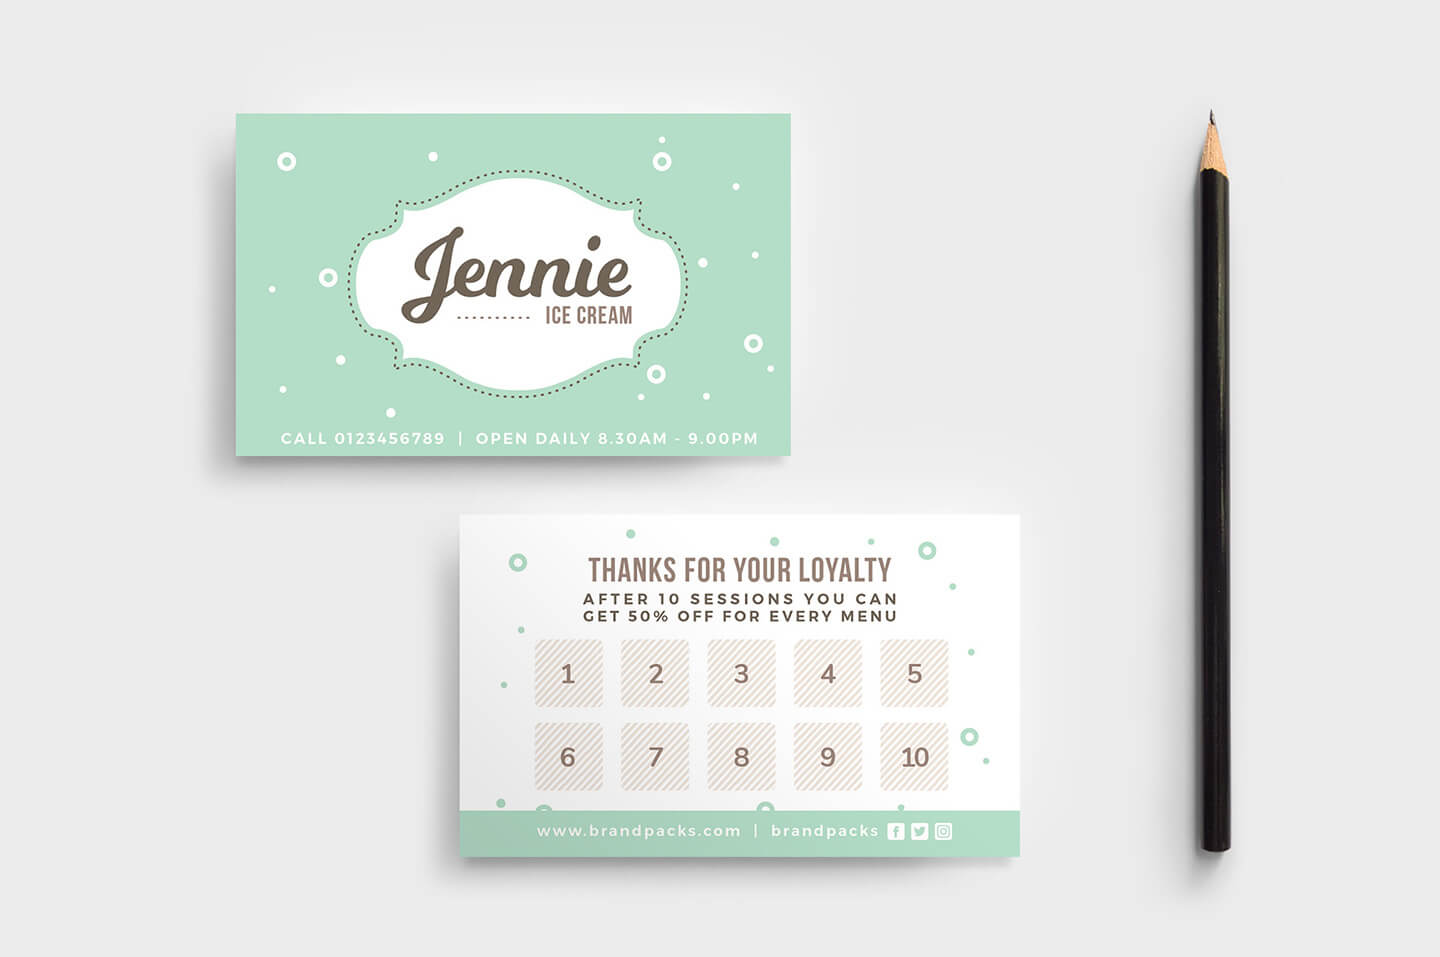 Free Loyalty Card Templates - Psd, Ai & Vector - Brandpacks For Loyalty Card Design Template